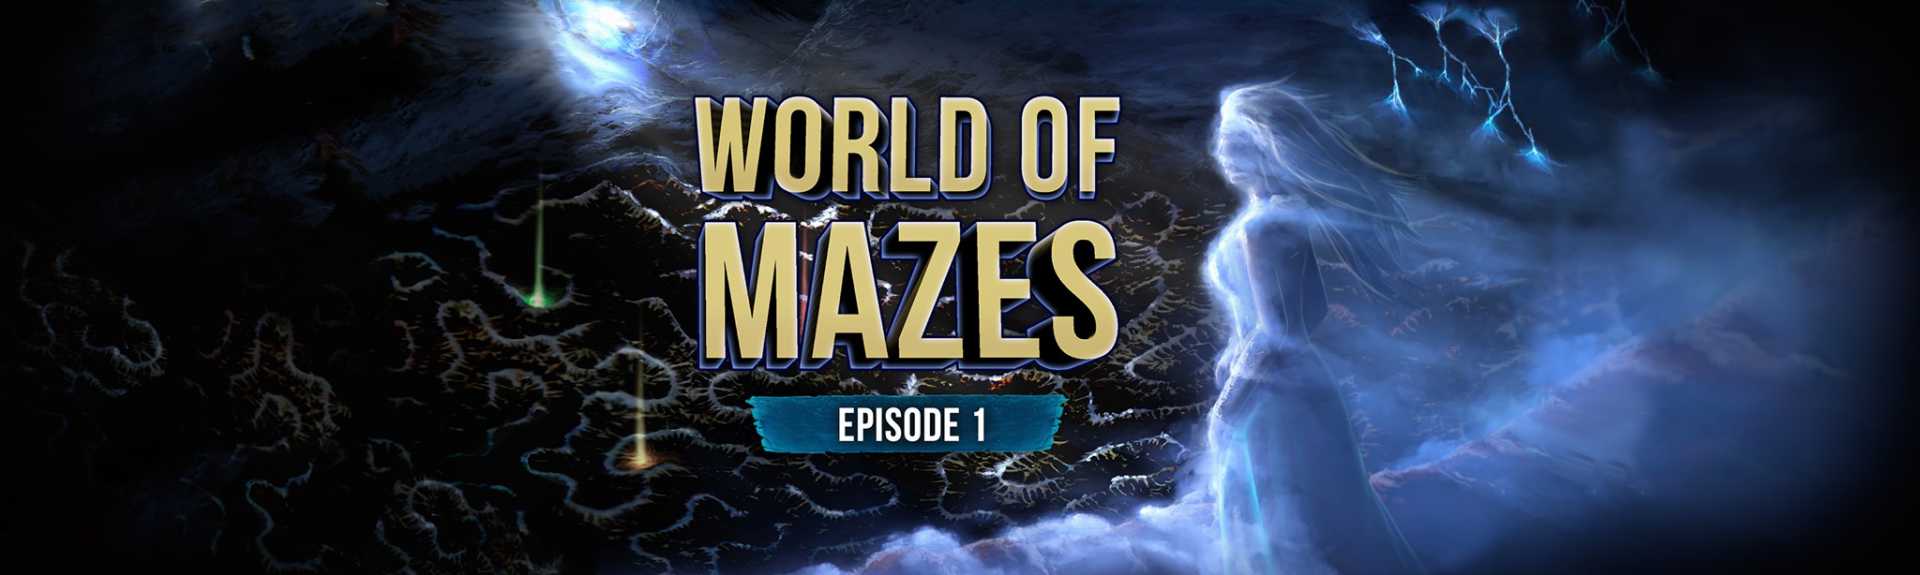 World of Mazes - Episode 1 (Chapters 1 & 2)